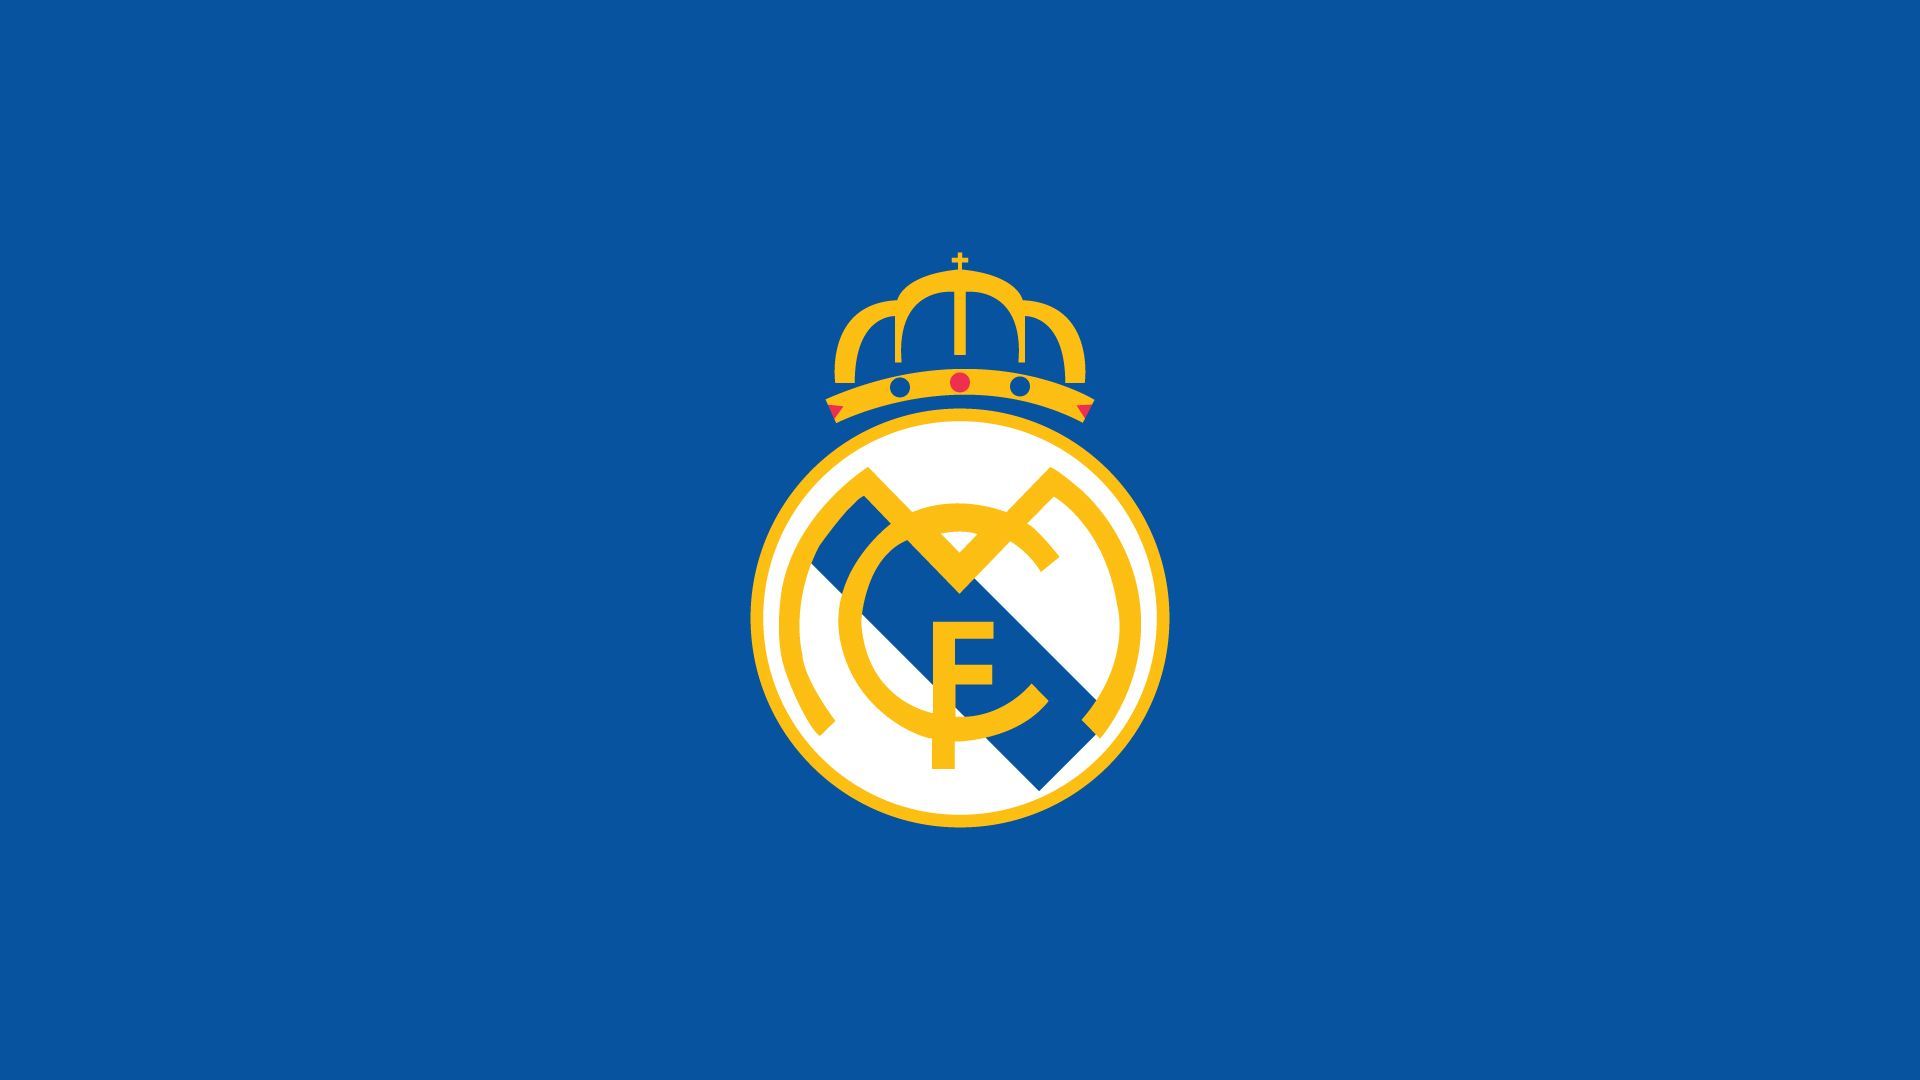 Made a simple Real Madrid wallpapers for anyone interested : realmadrid